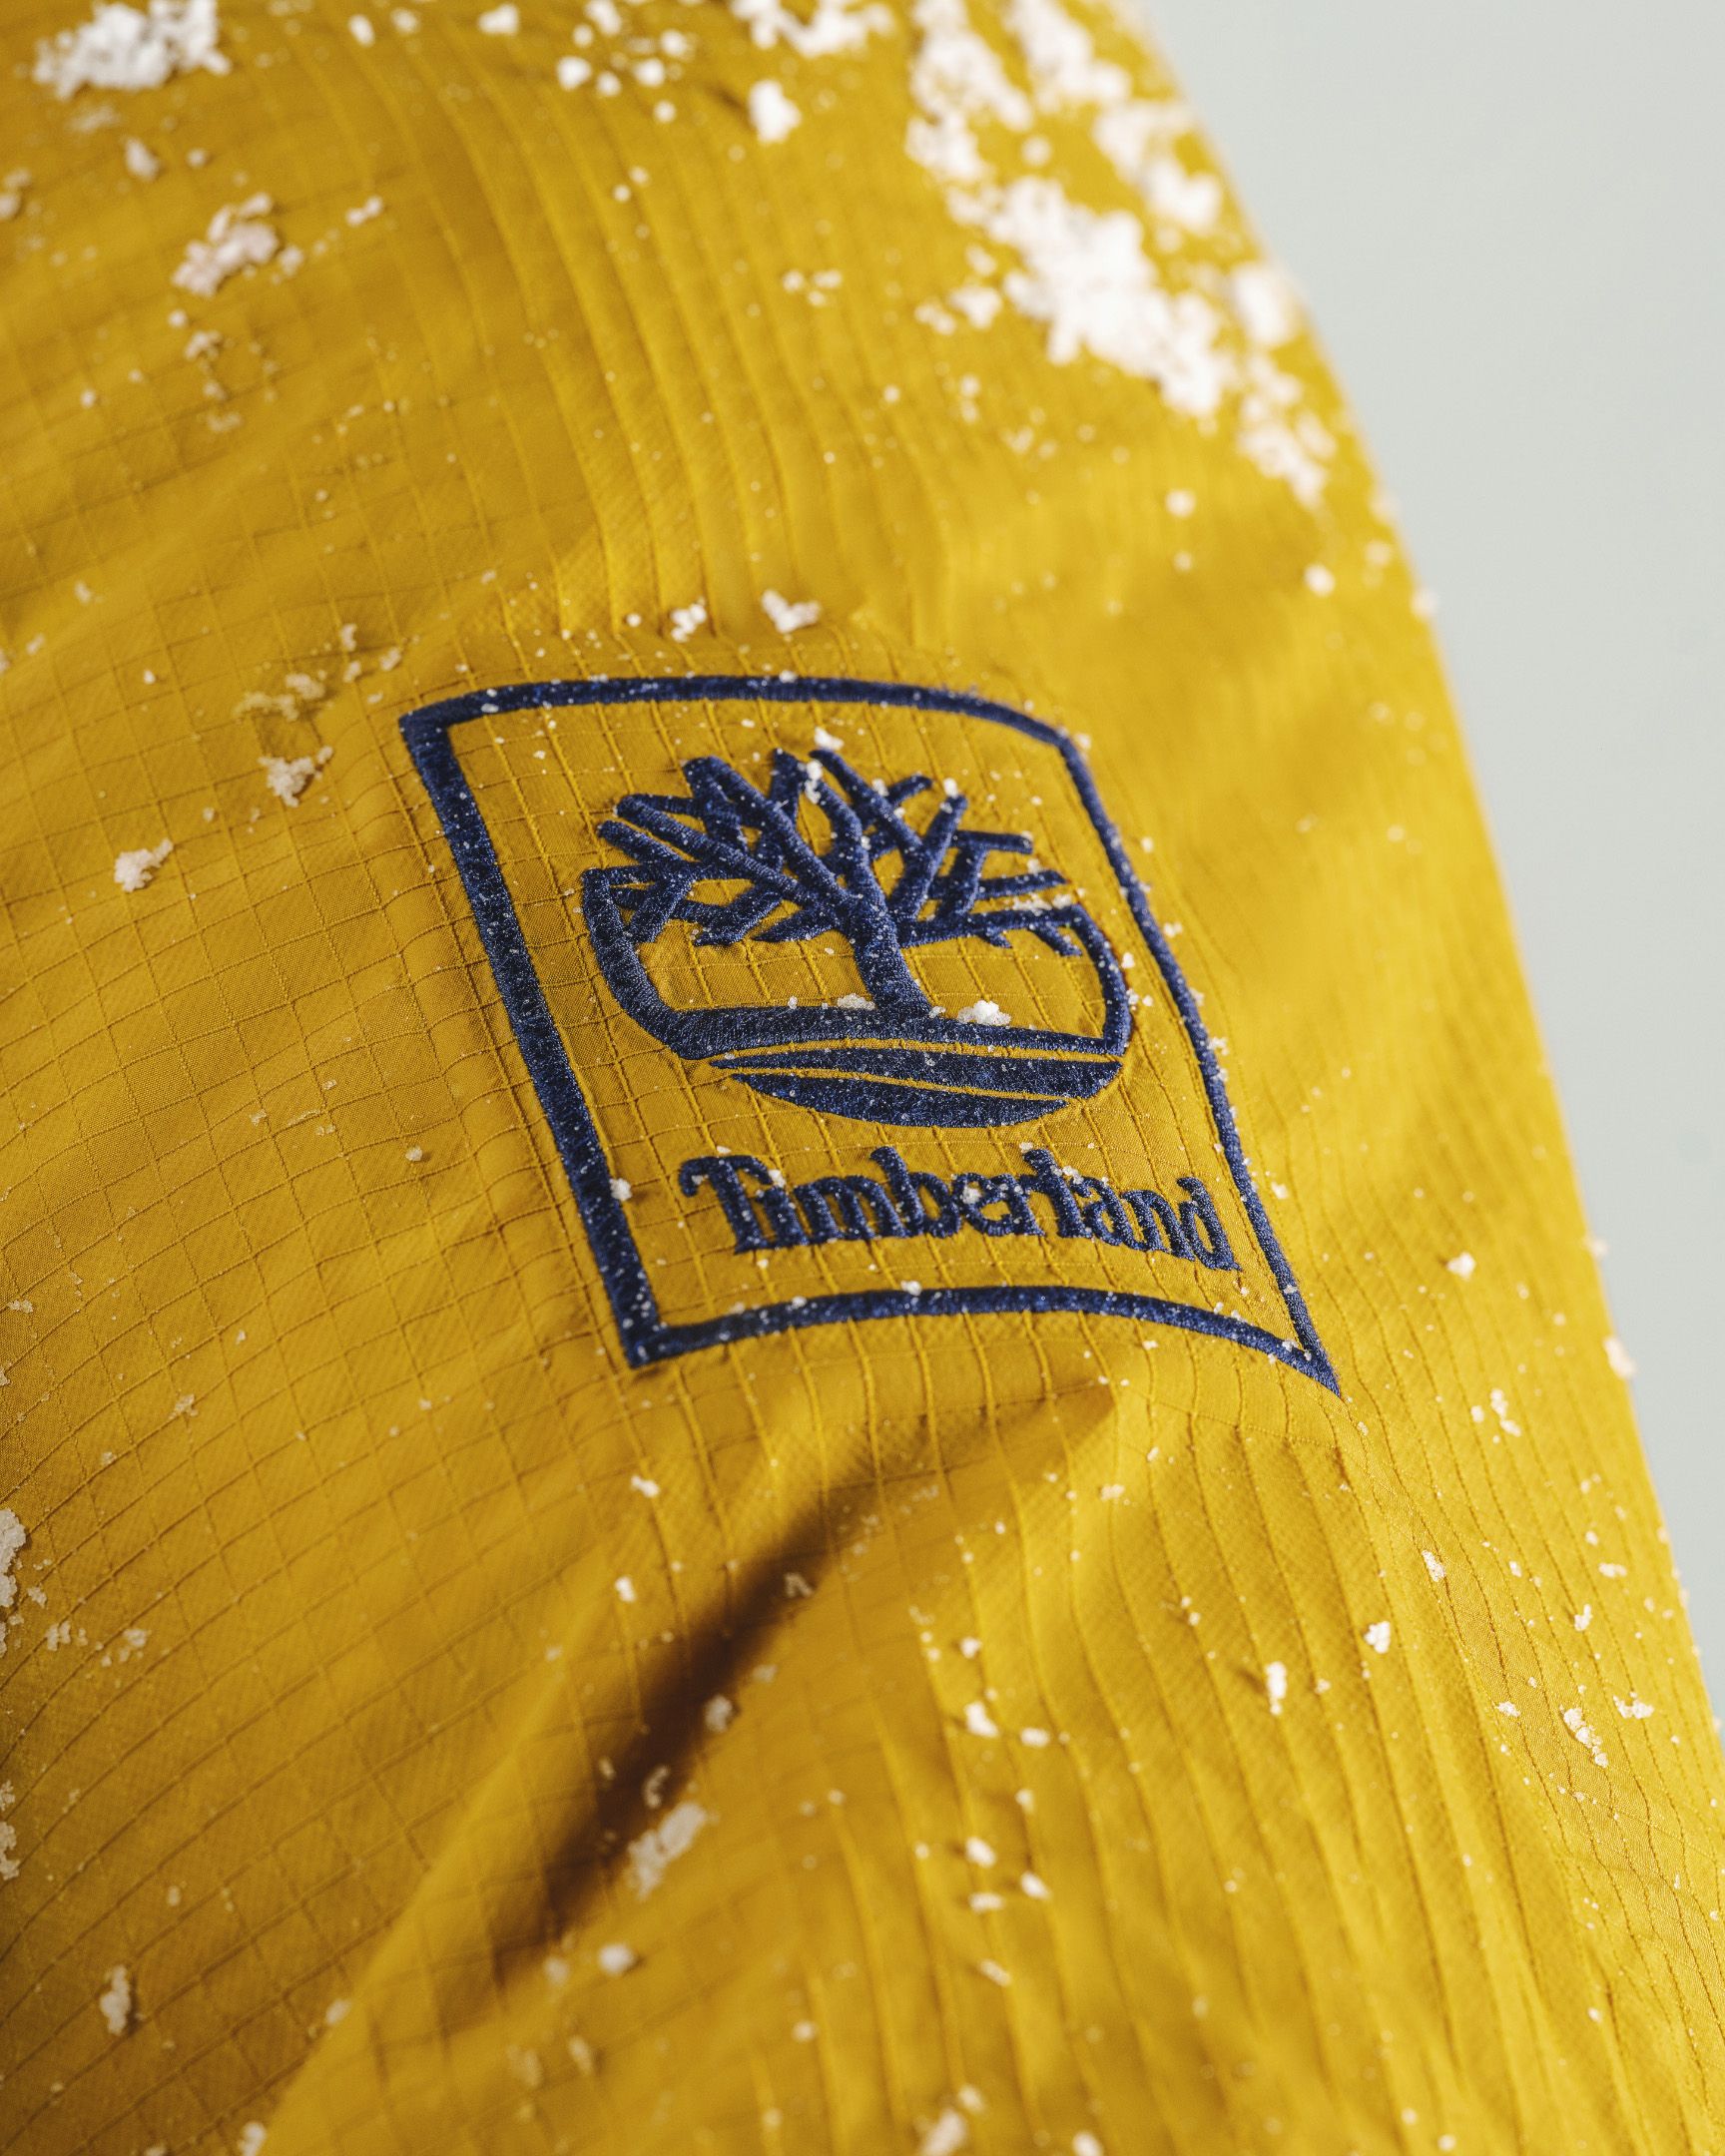 close up of timberland logo on jacket with snow on jacket